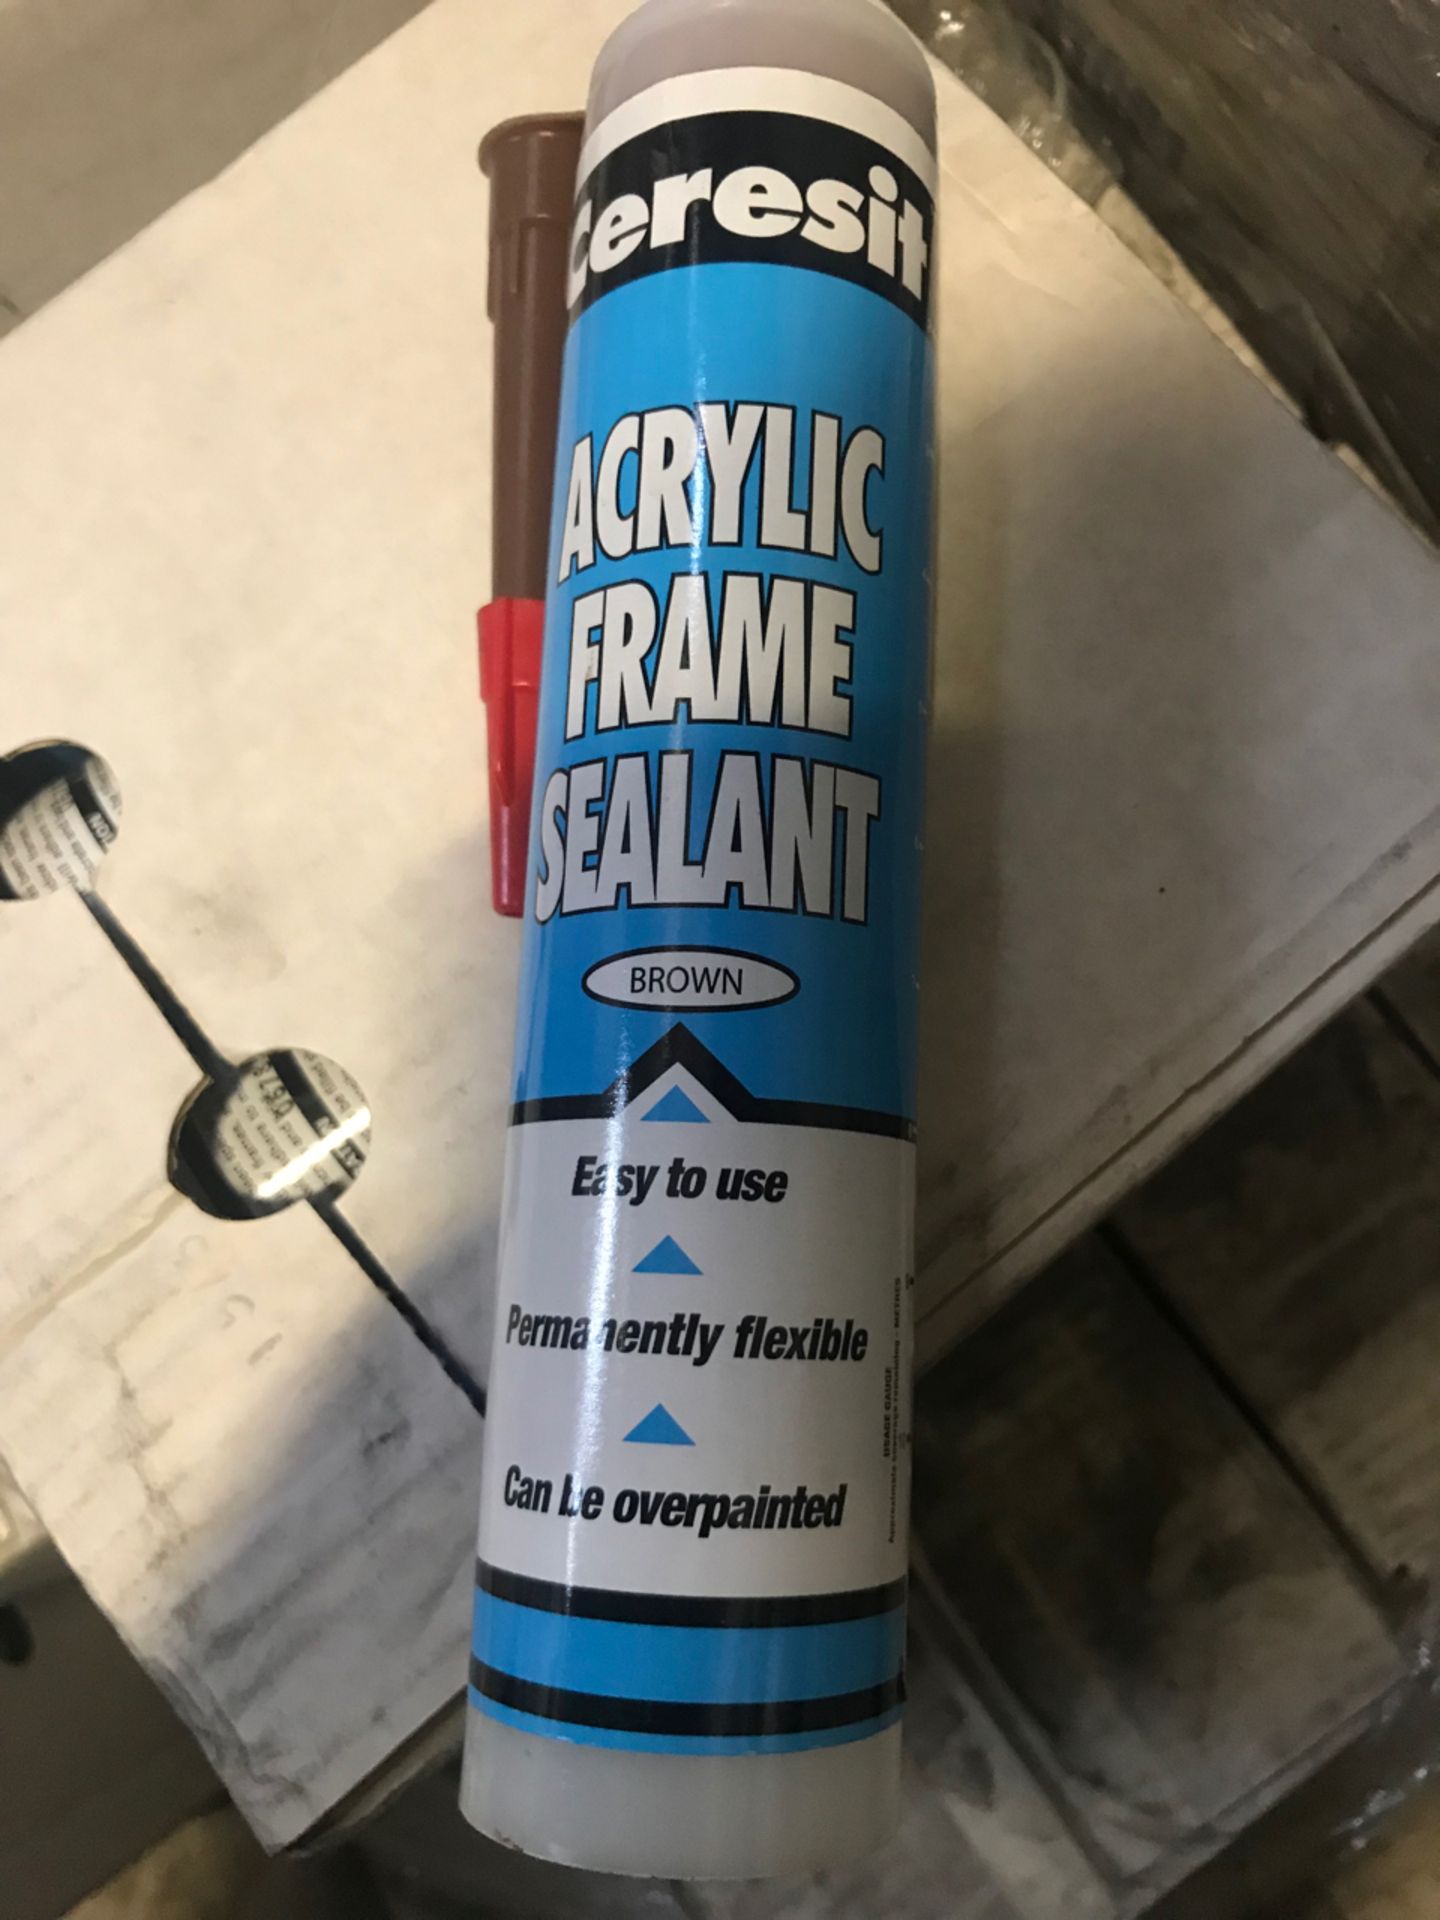 Pallet No- 16 - 40 Boxes Of Ceresit Acrylic Frame Sealant In Brown, 12 Per Box - Image 3 of 5